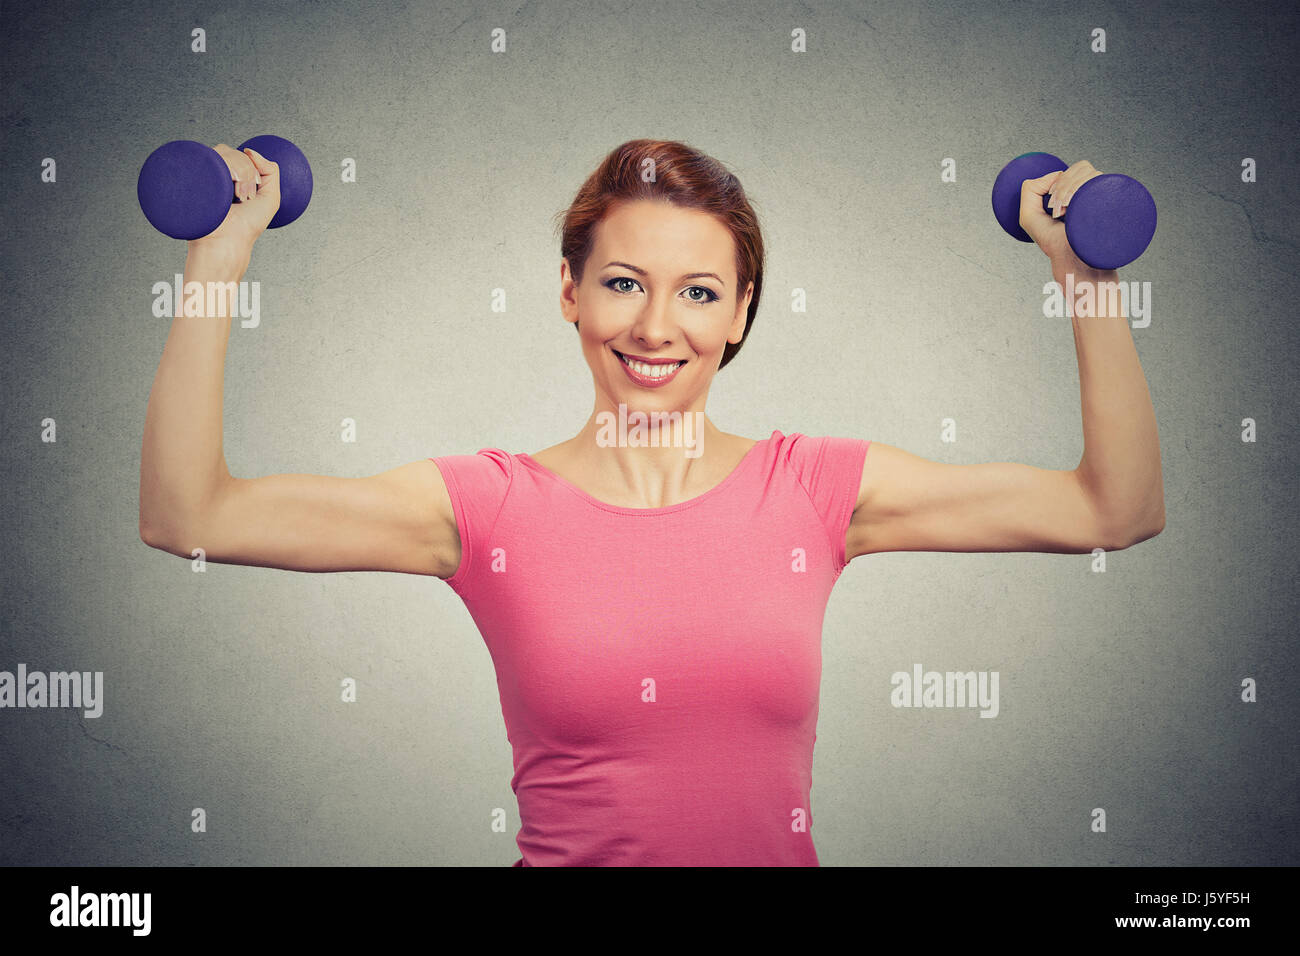 Closeup portrait beautiful fit healthy model woman flexing muscles lifting dumbbells confident showing her strength isolated grey background. Positive Stock Photo